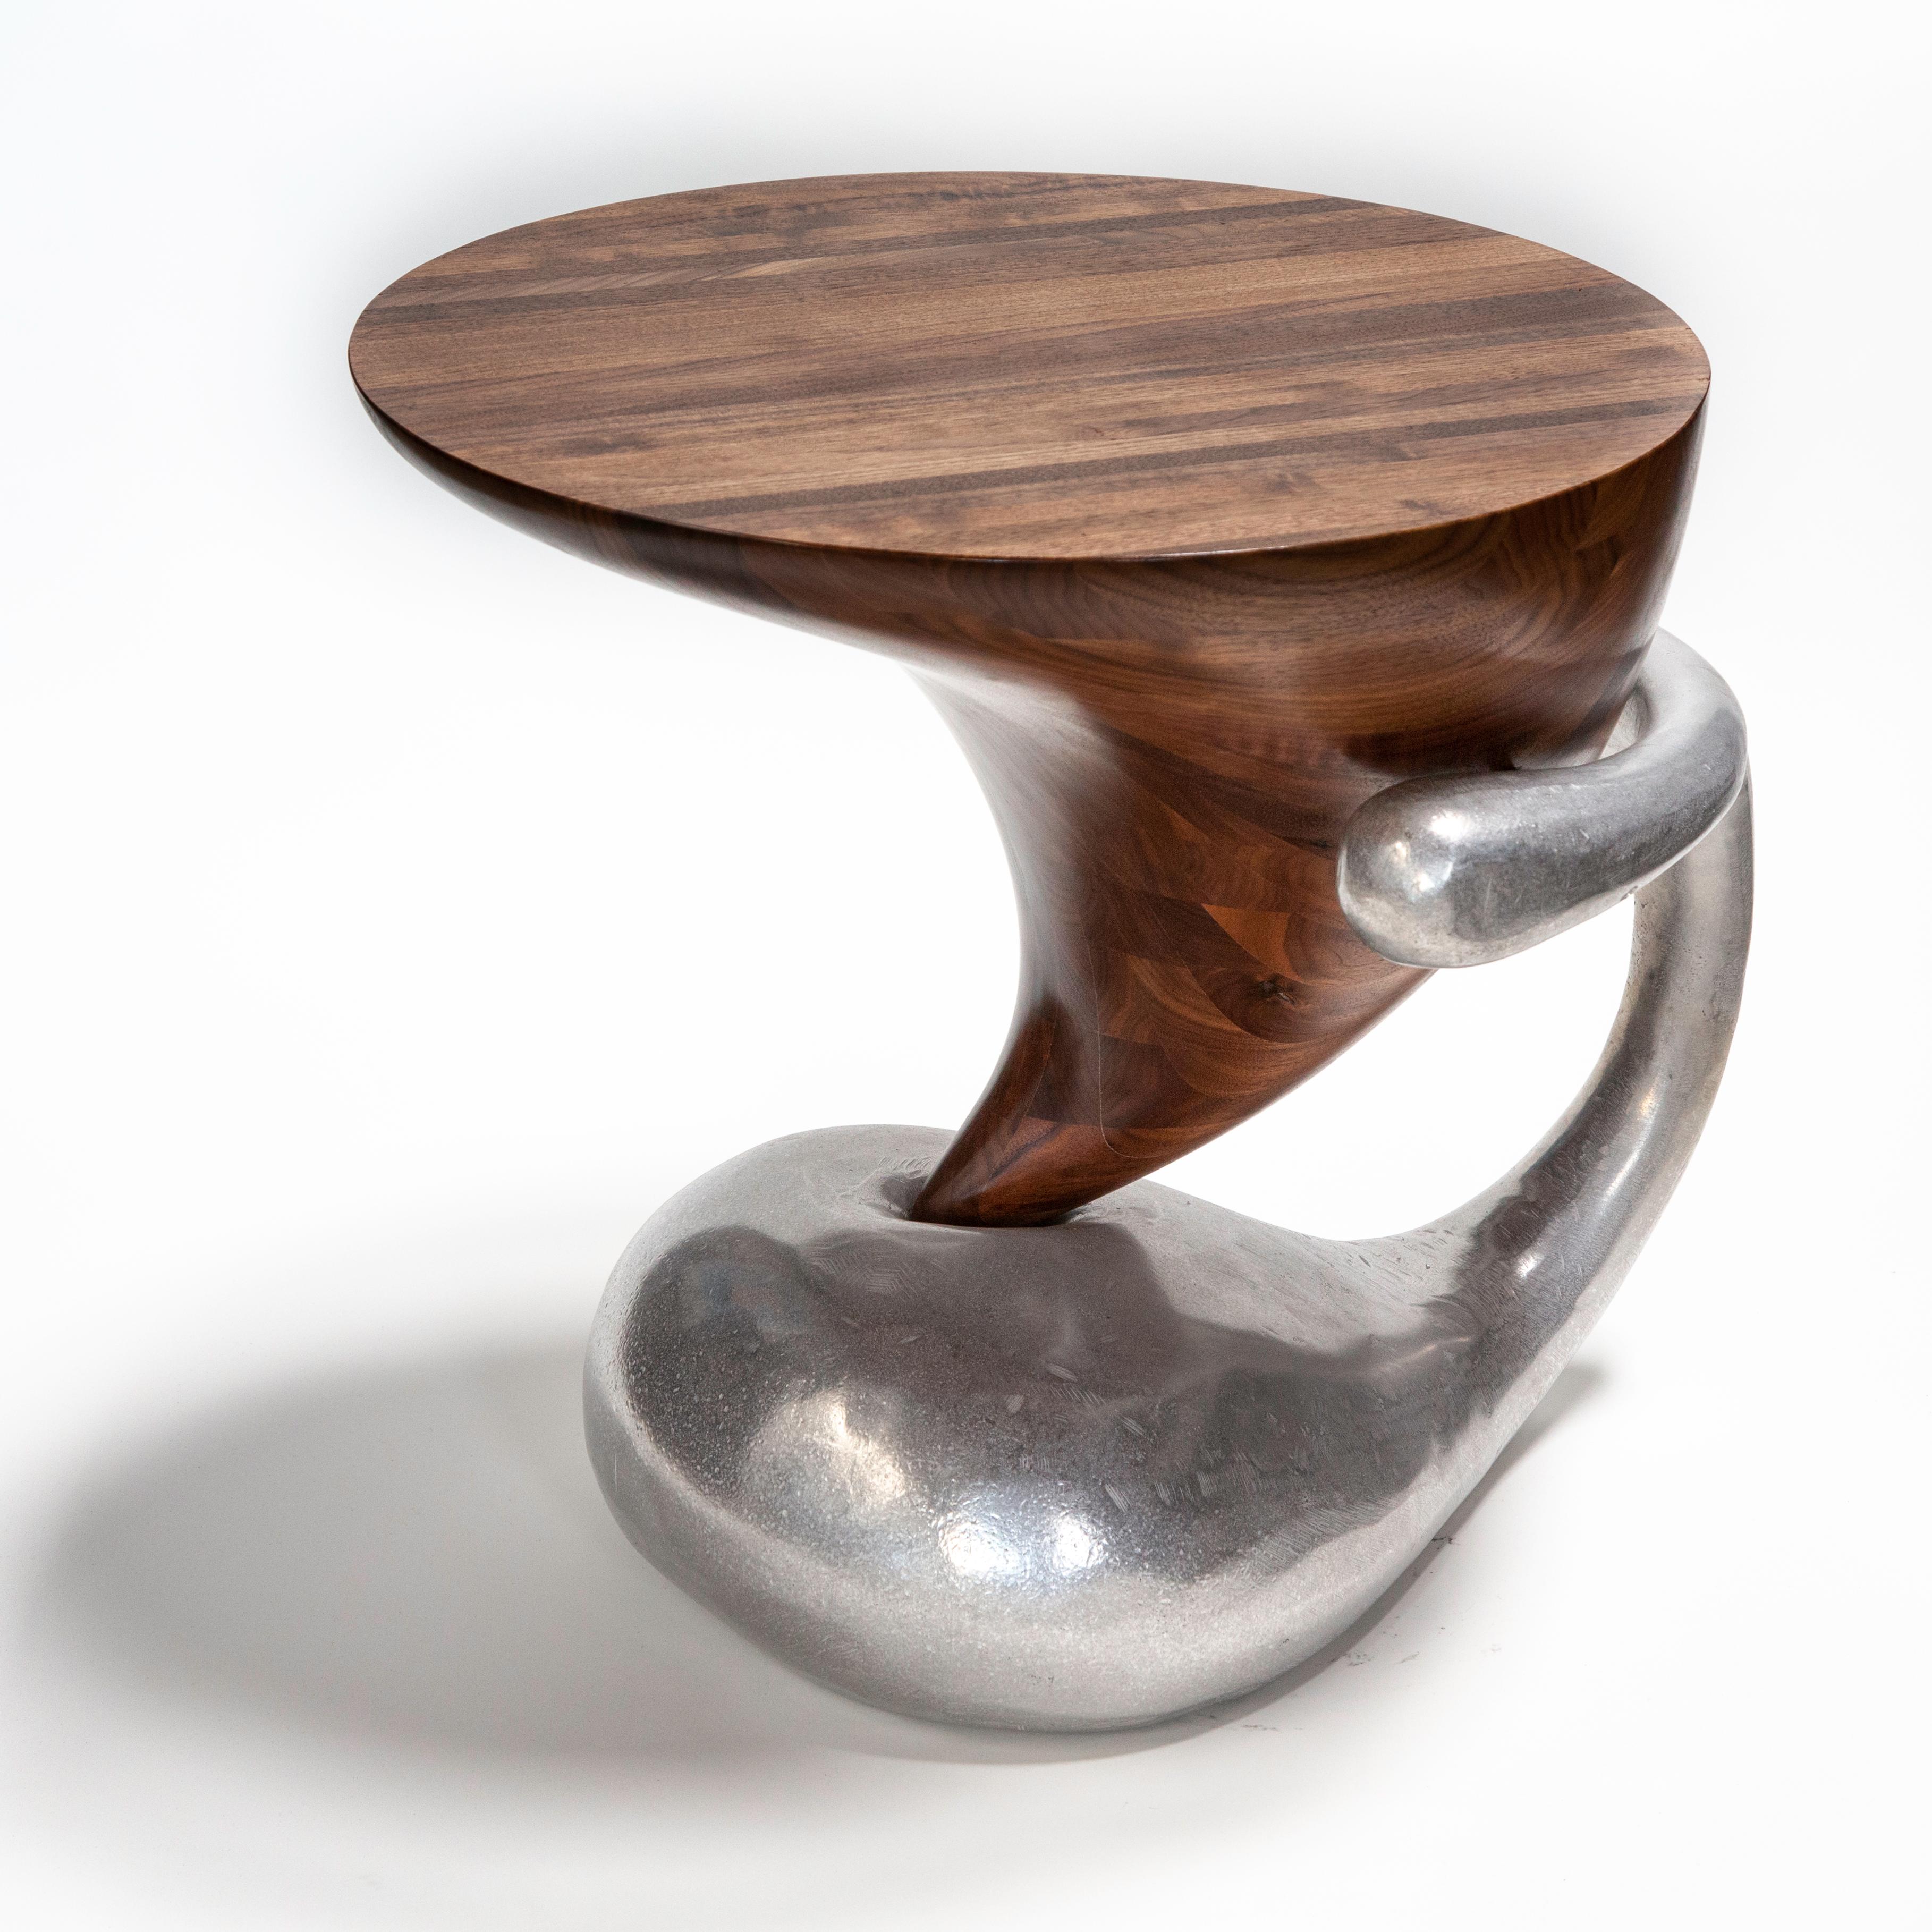 Jordan Mozer (b.1958), paradise poke side table, cast and burnished recycled aluminium and solid Wisconsin walnut, Chicago, USA, 2018.
Provenance: collection of the artist. Etched signature.
Measurements: 20” x 24” x 21” ( 51 cm l x 61 cm x 53 cm